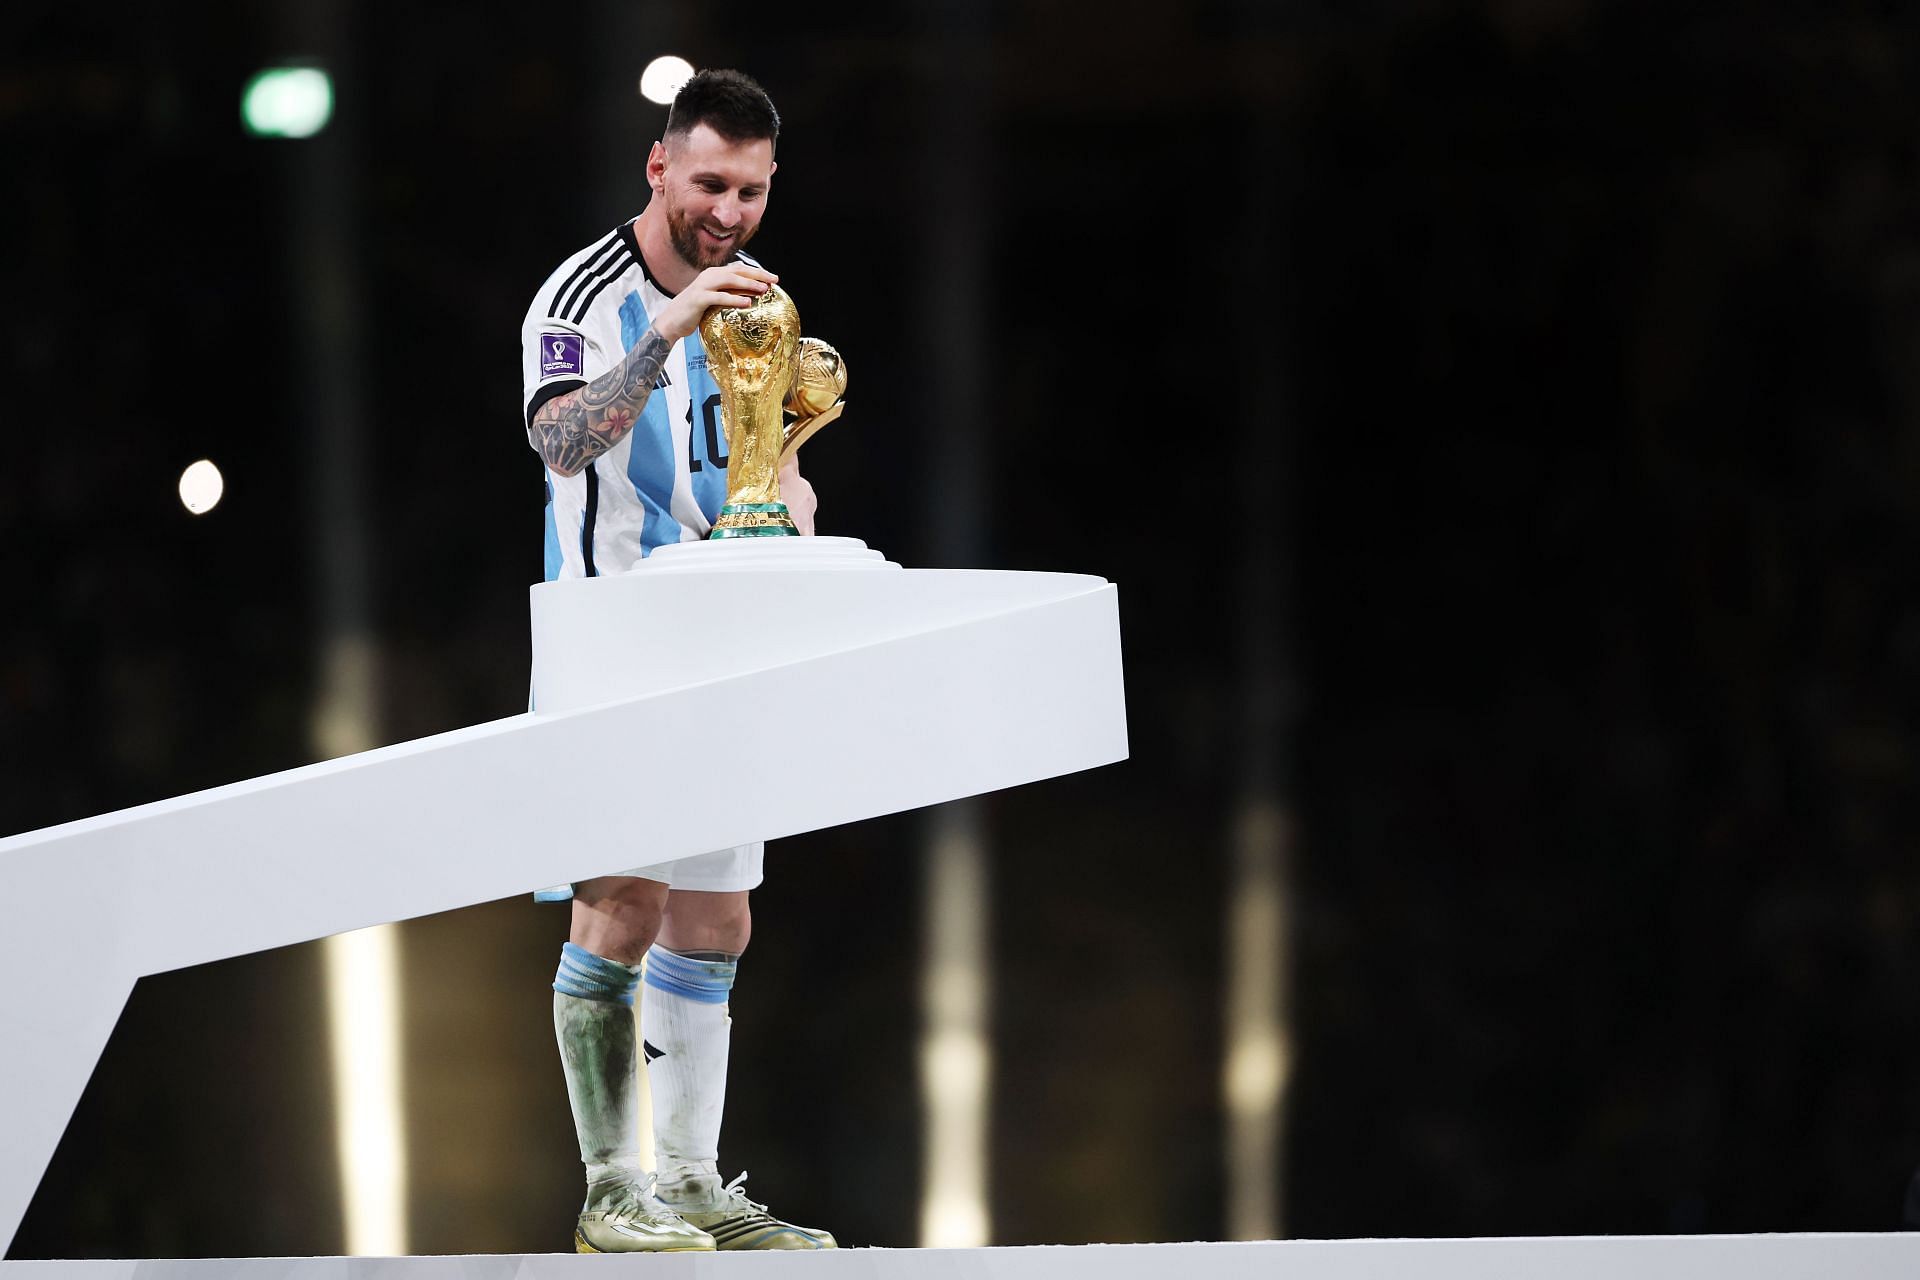 Lionel Messi embraces the World Cup trophy following their win.